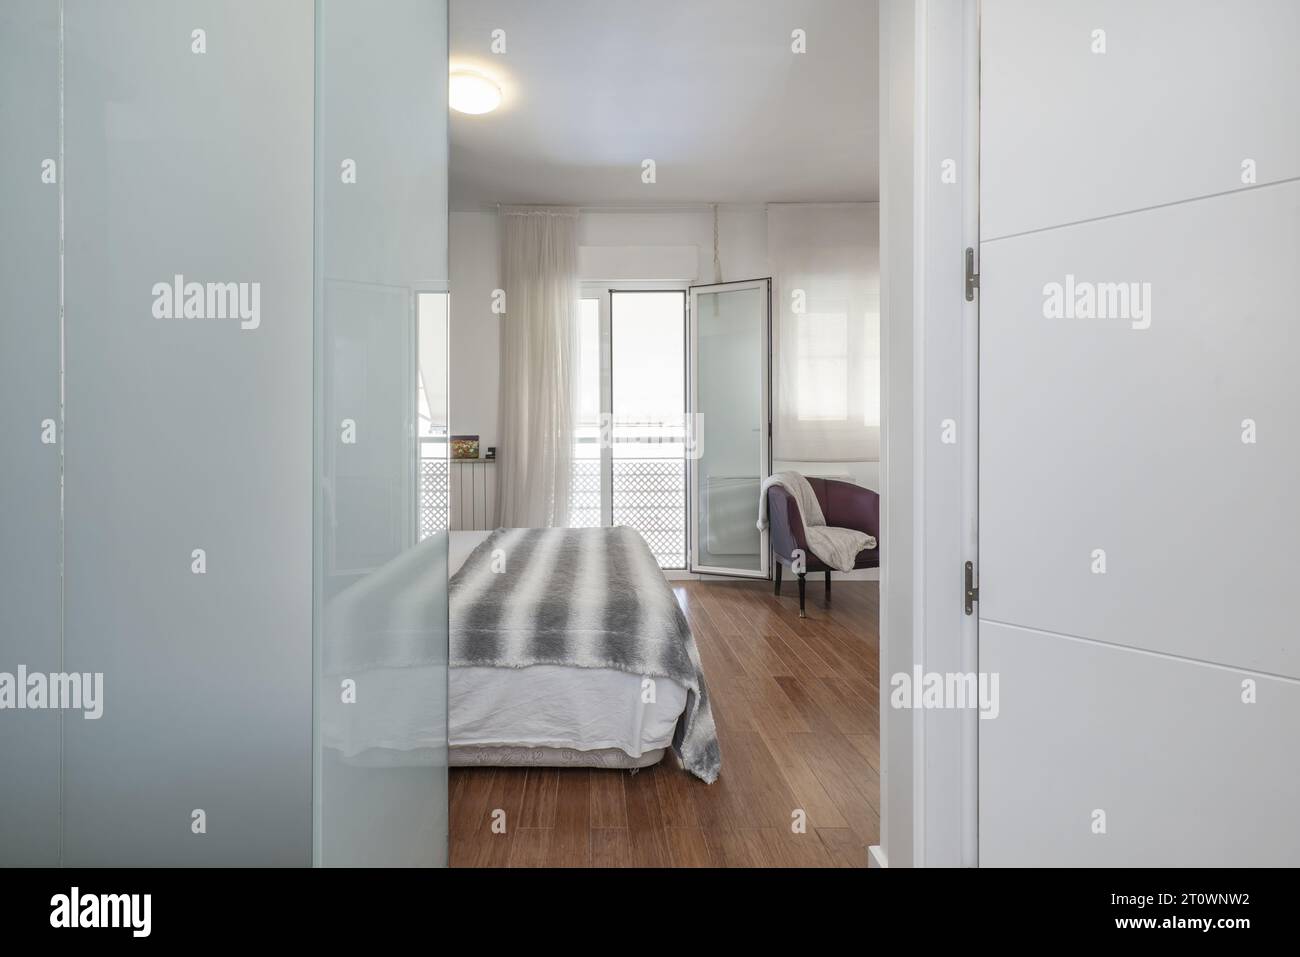 Double bedroom en suite with a balcony with views, bathroom with separate shower and dressing room behind a mirror Stock Photo